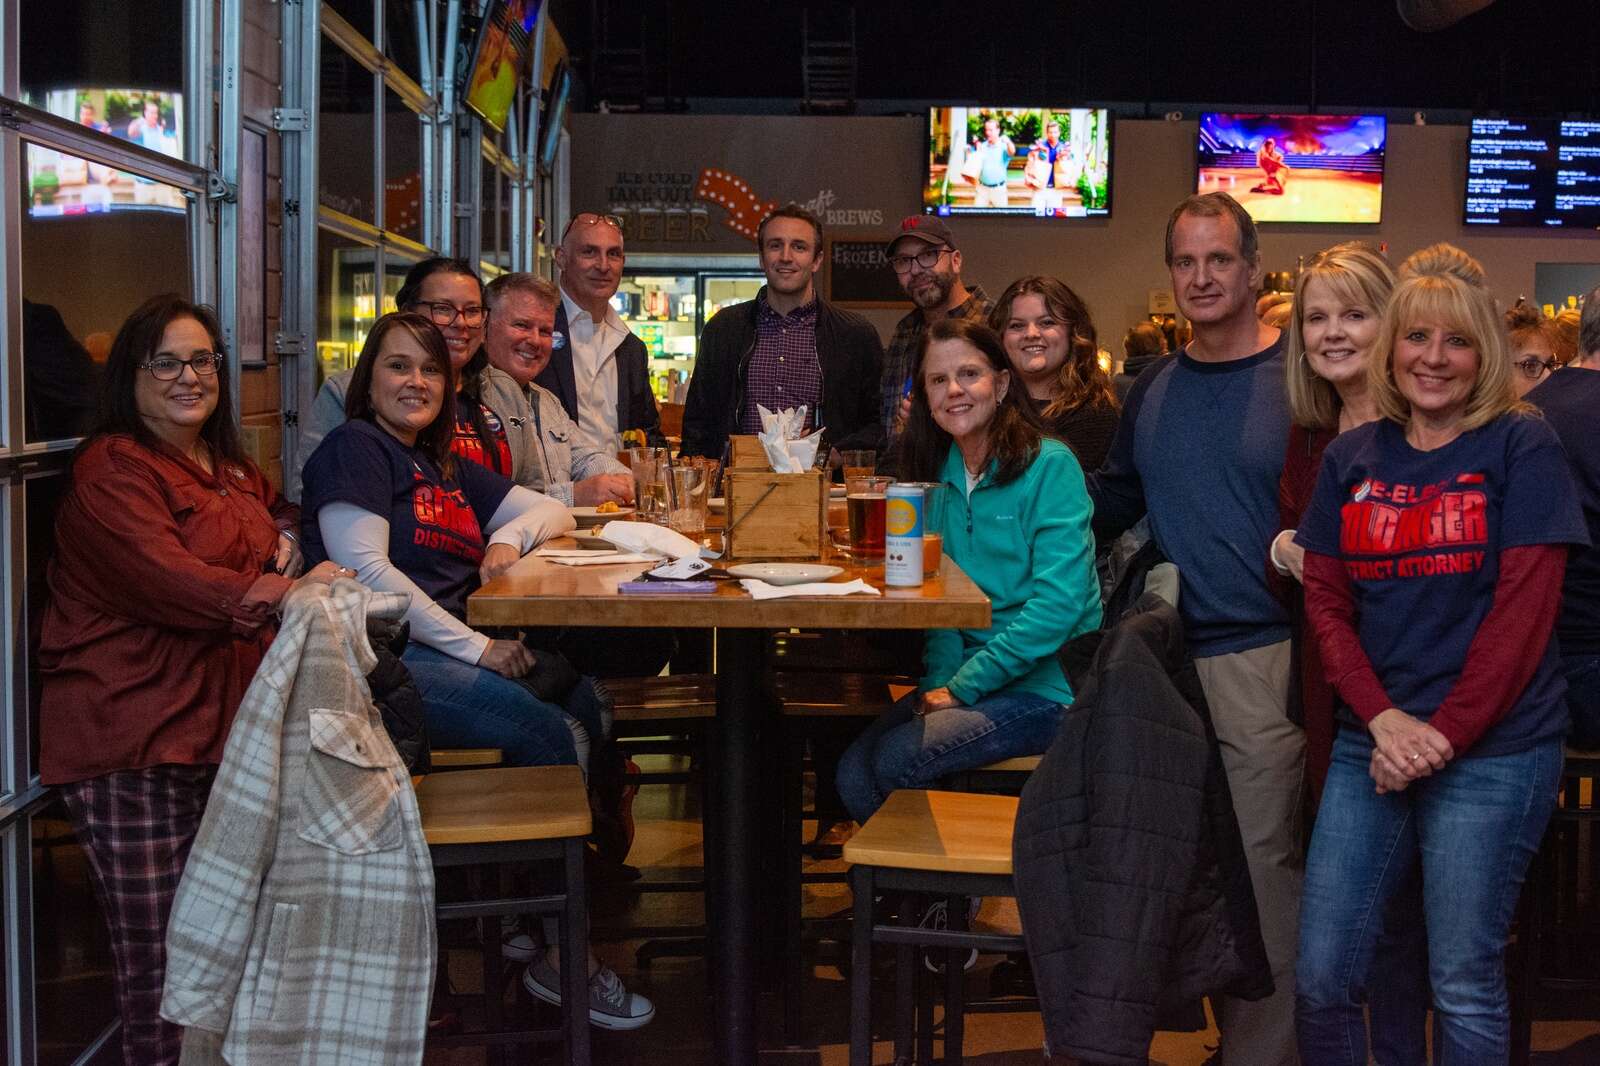 Richard Goldinger’s supporters gathered Tuesday at the Hardwood Cafe